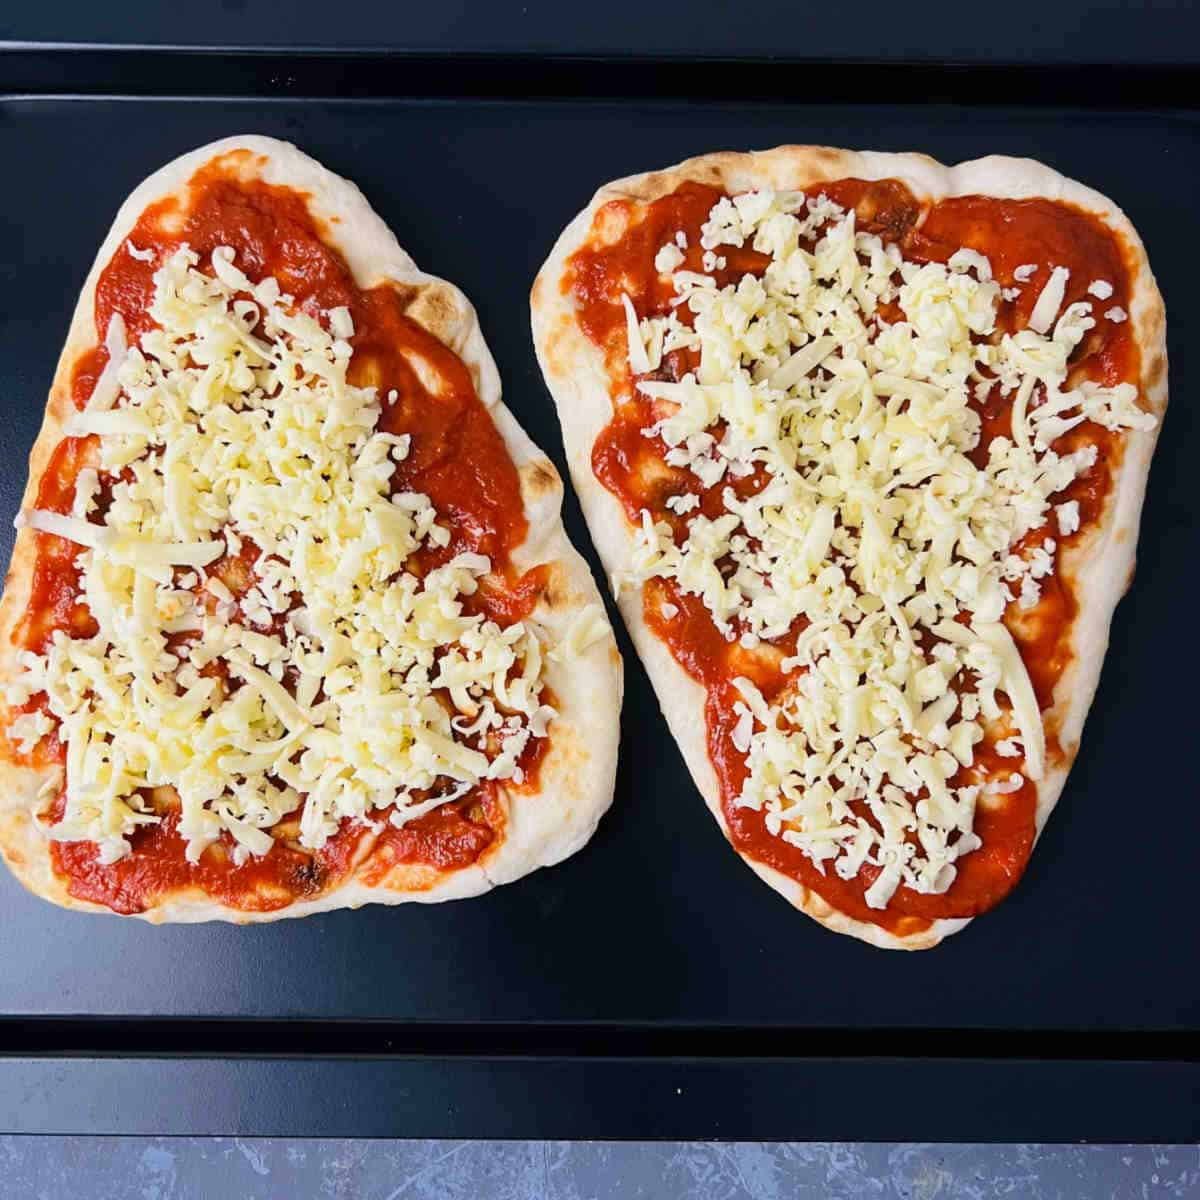 Top naan with pizza sauce and cheese.